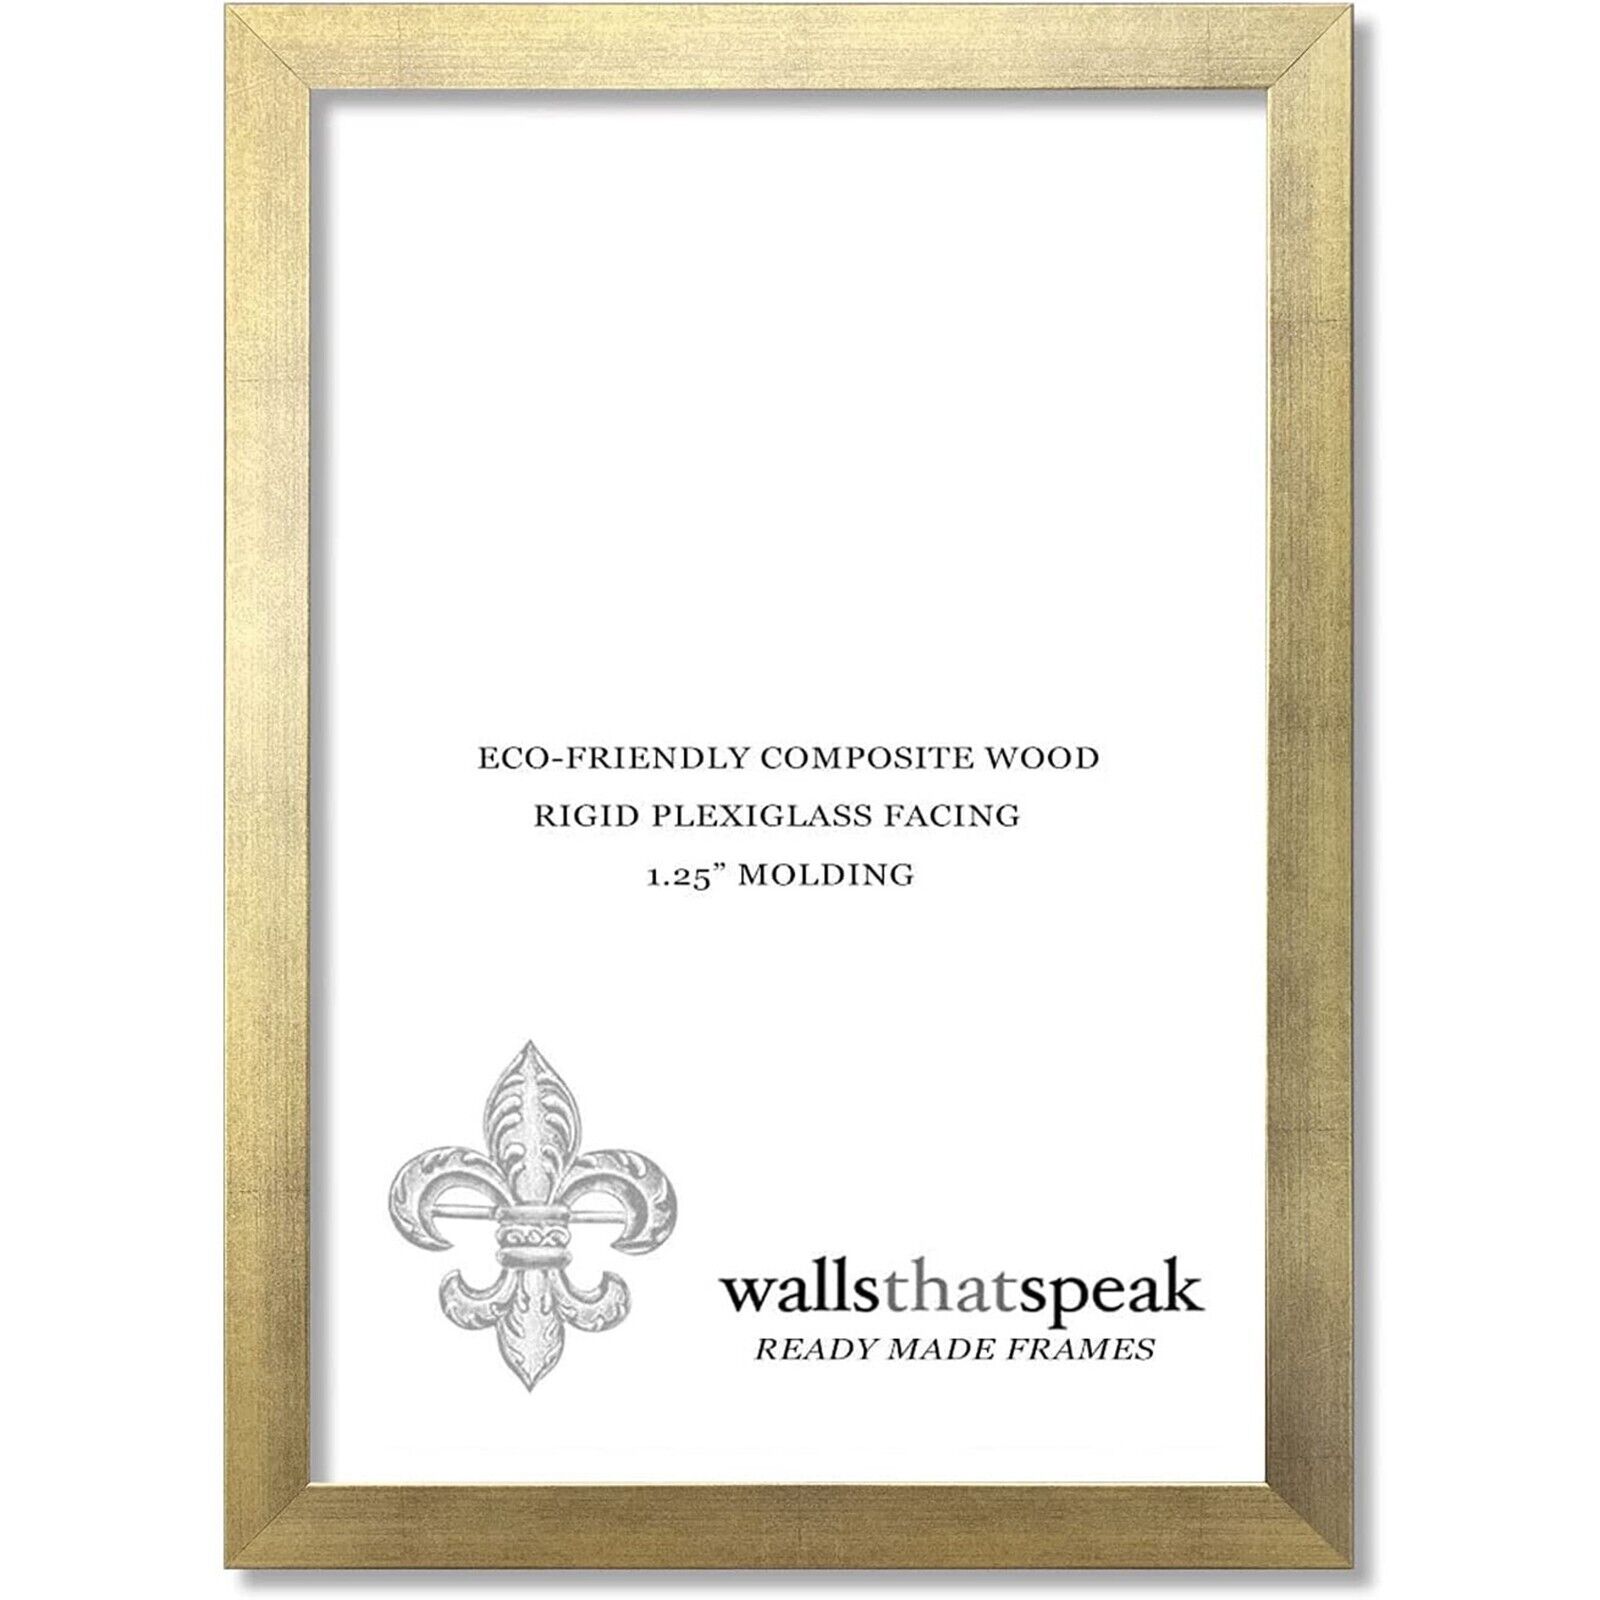 WallsThatSpeak Gold Picture Frame for Puzzles, Posters, Photos, or Artwork